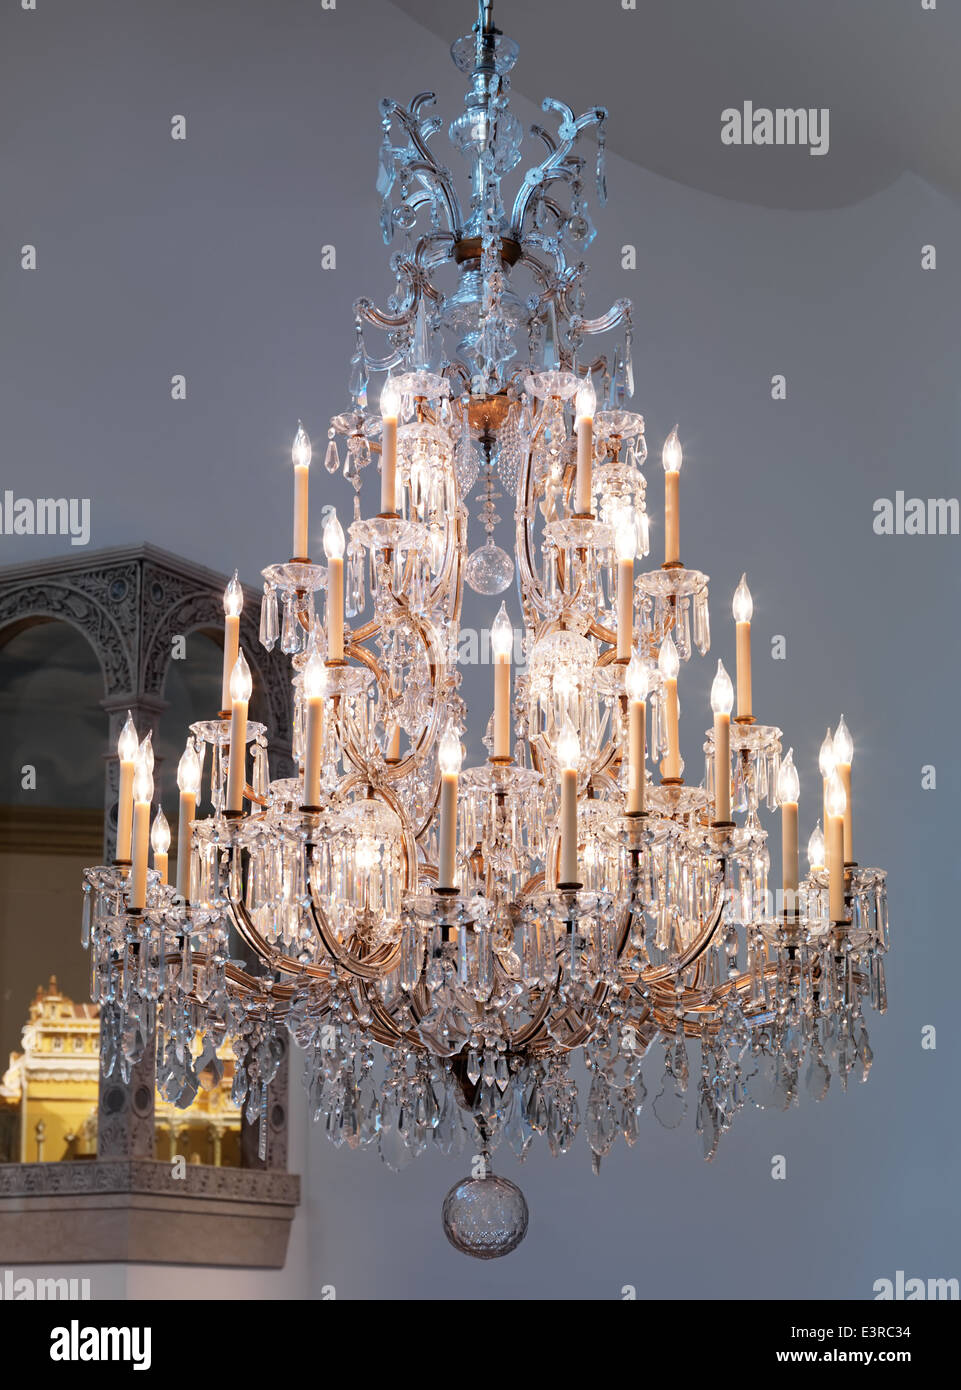 Large crystal chandelier Stock Photo